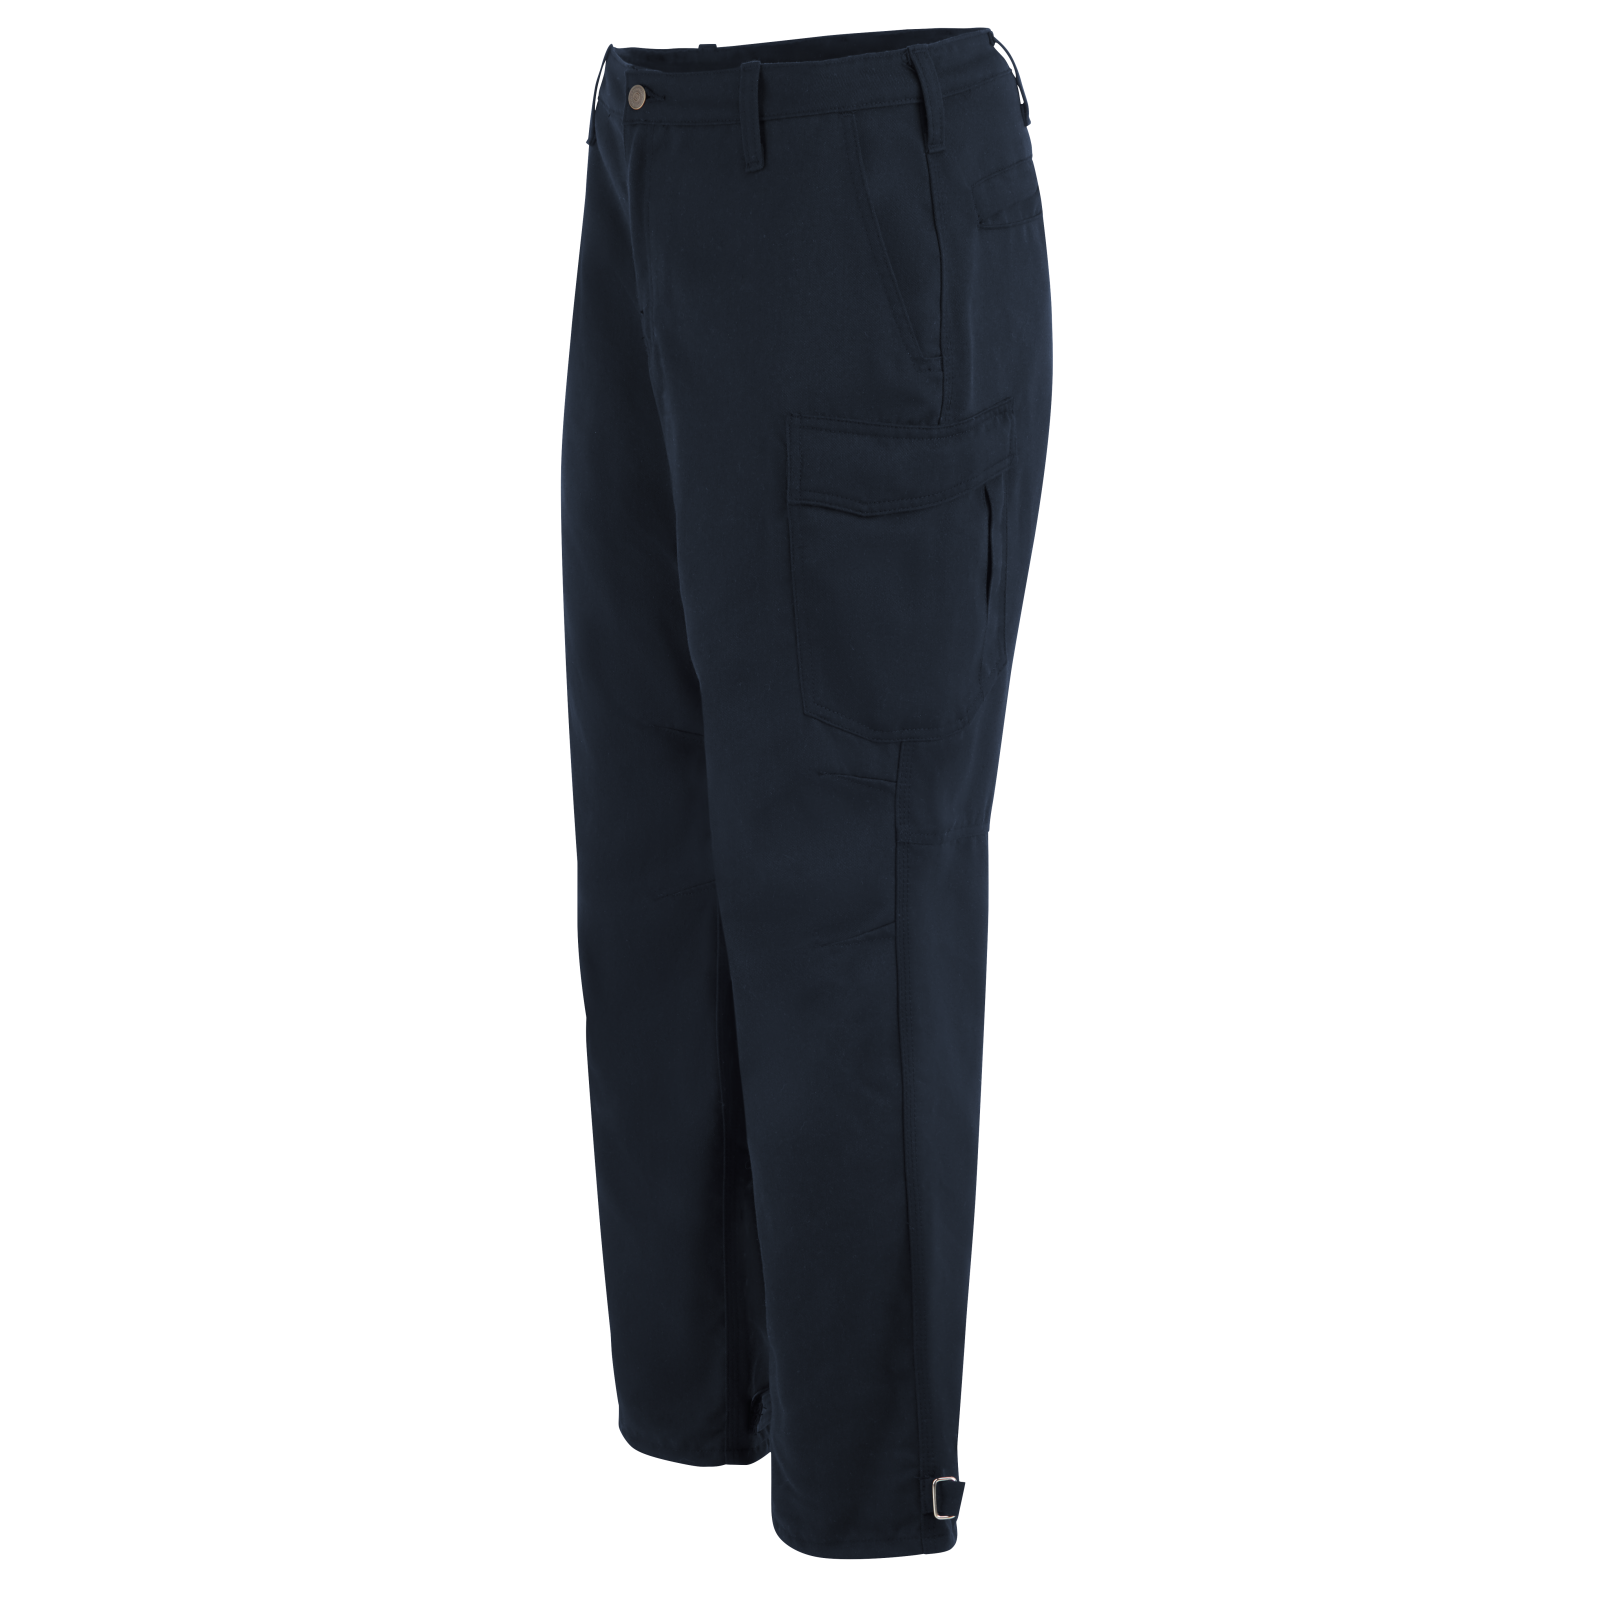 Workrite FR Pants Wildland Dual-Compliant Tactical (FP62) | The Fire Center | Fuego Fire Center | FIREFIGHTER GEAR | Developed using recommendations from the Department of Homeland Security Wildland Firefighter PPE clothing system program, this line was meticulously purpose-built. Also features two large cargo pockets with flaps and hook-and-loop closures for even more secure storage.